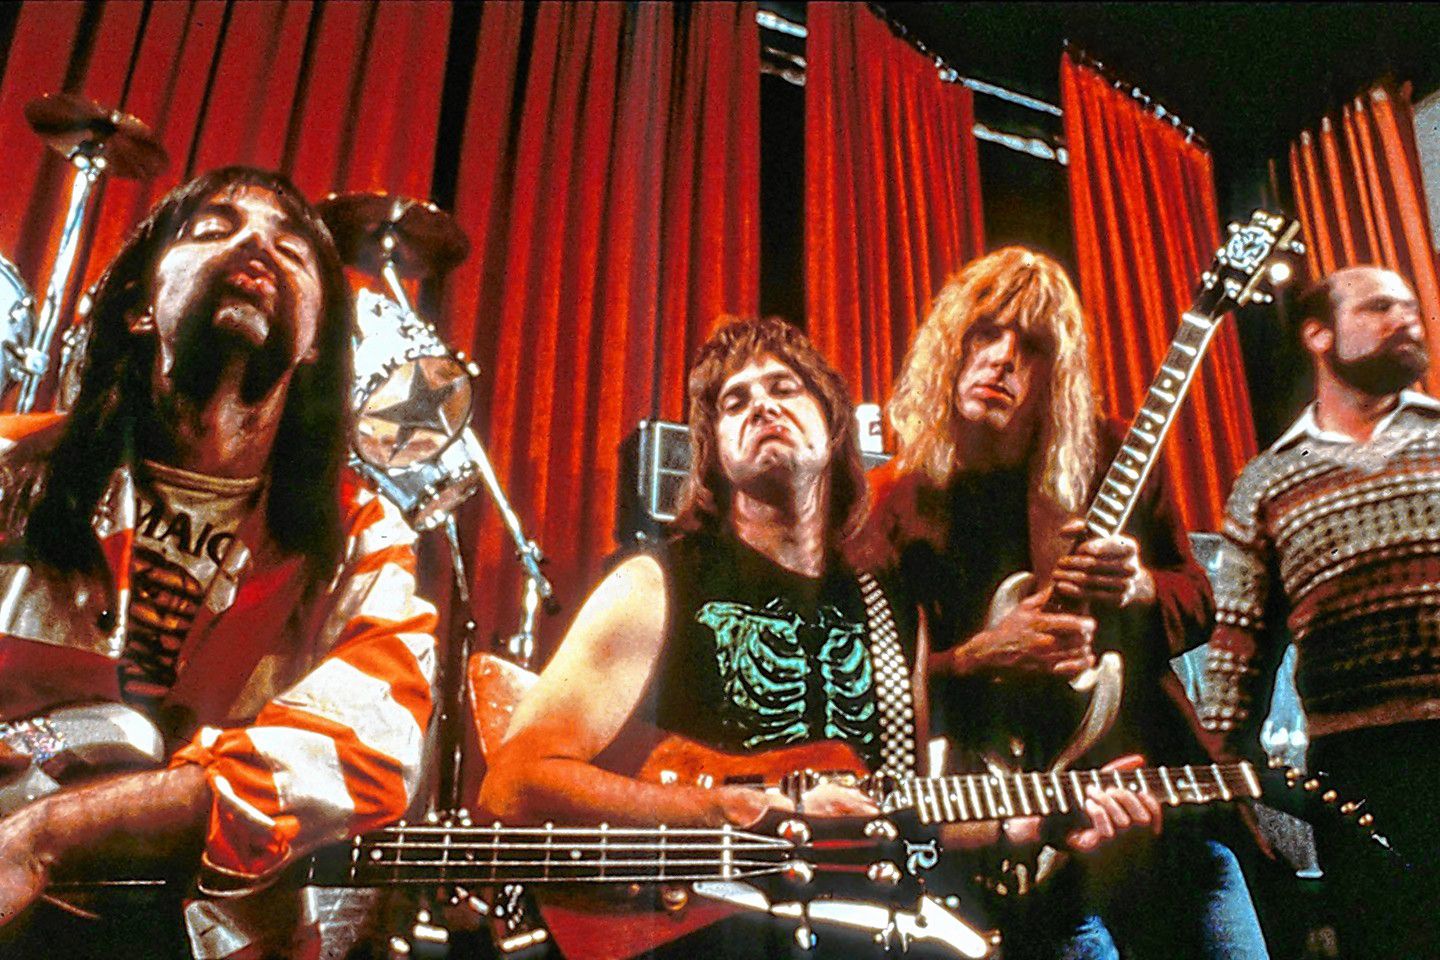 Cinemadope: This Is Spinal Tap deadpans for gold